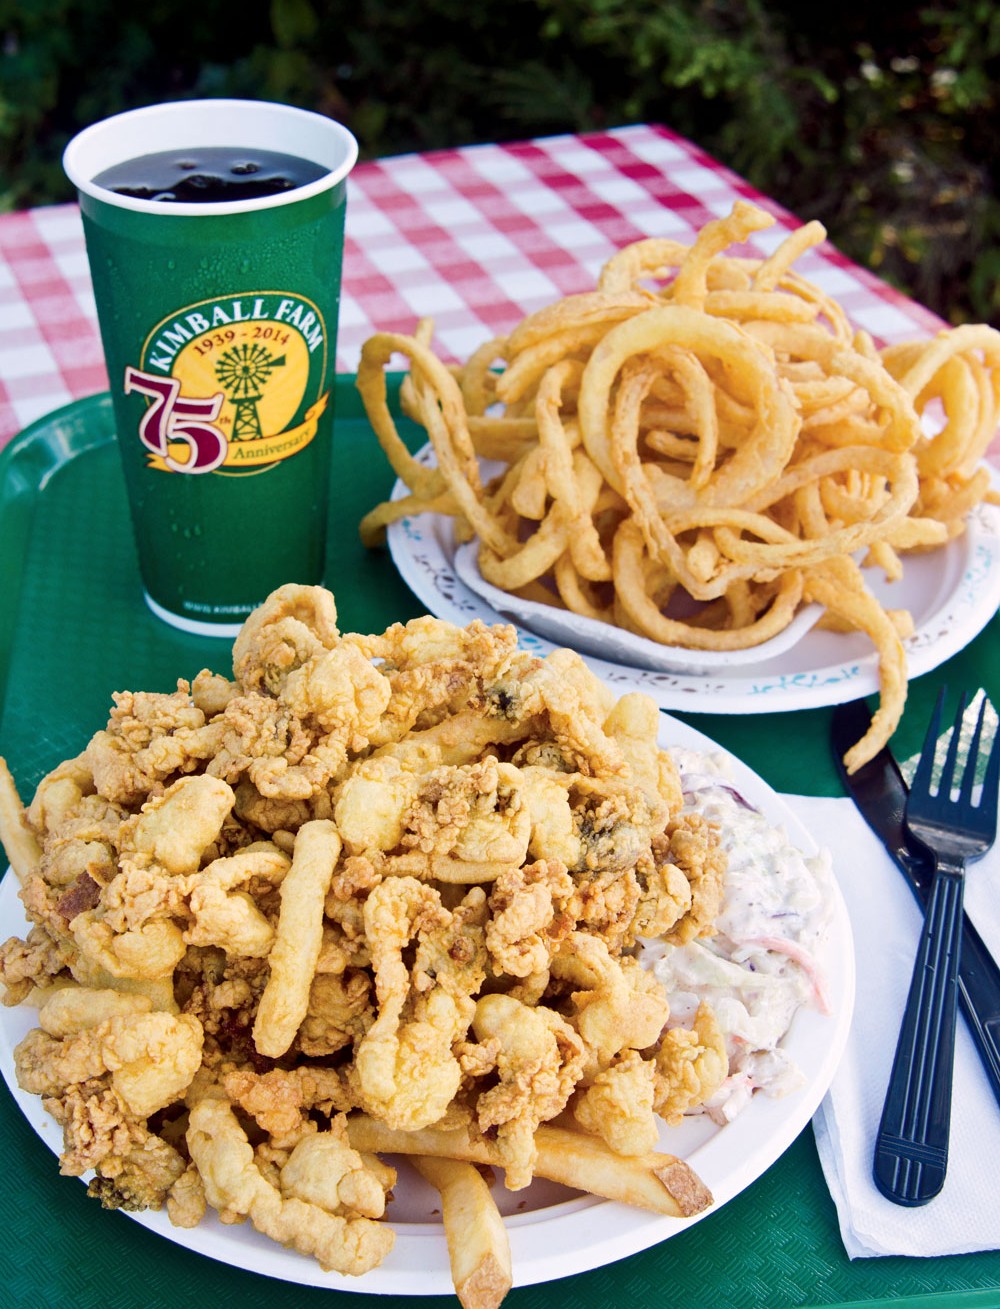 For the taste of summer, you can’t beat Kimball’s tender fried clams and onion rings.